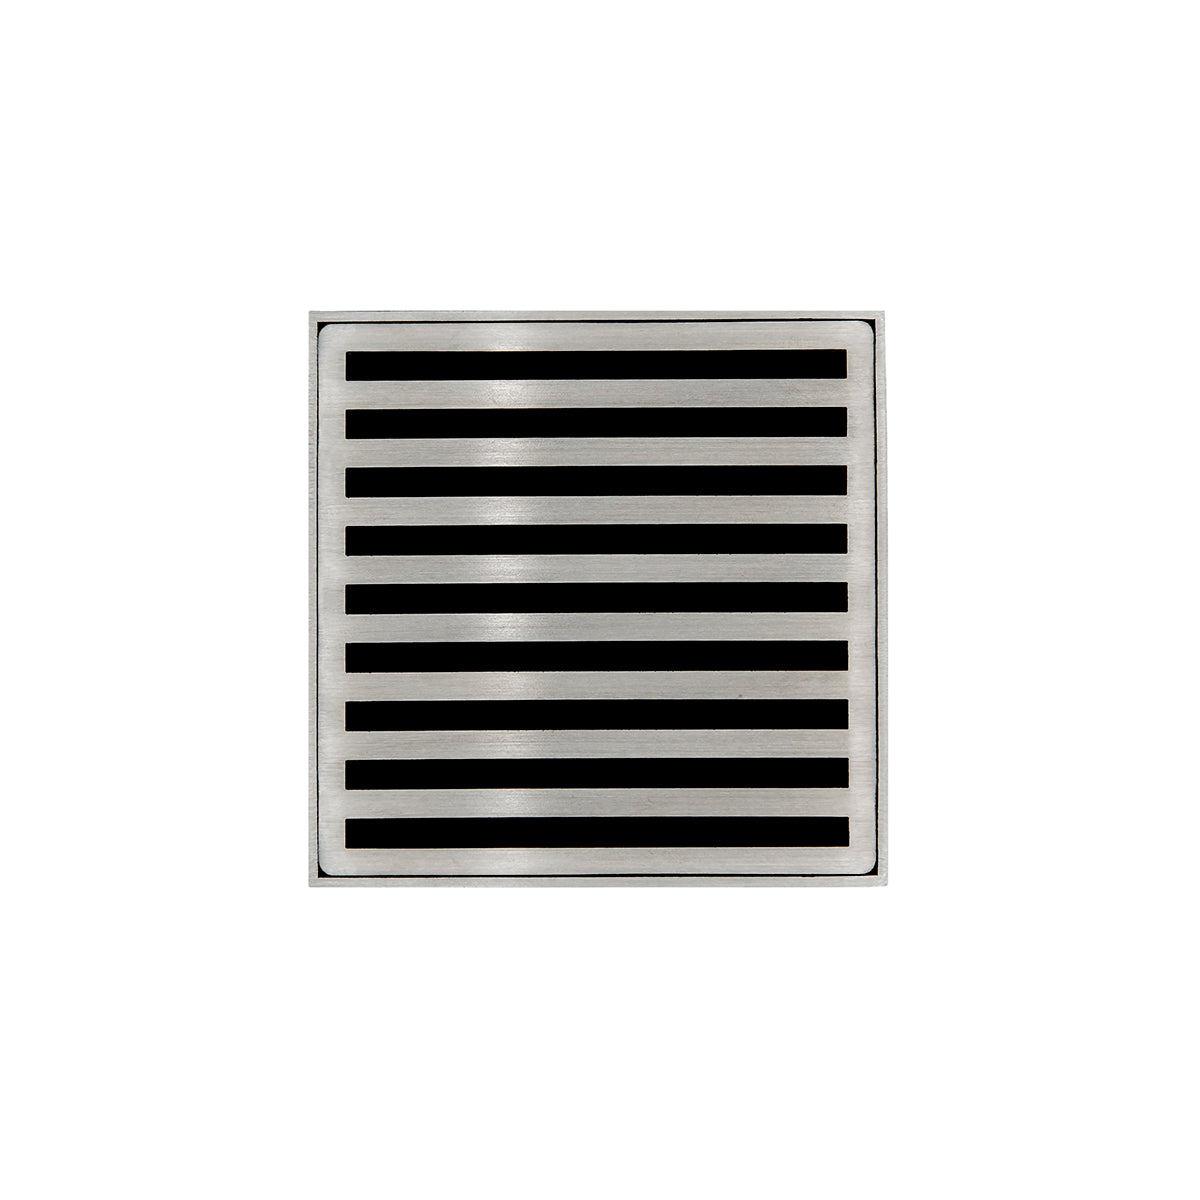 Infinity Drain 4" x 4" NDB 4 Premium Center Drain Kit with Lines Pattern Decorative Plate with PVC Bonded Flange Drain Body, 2", 3" and 4" Outlet